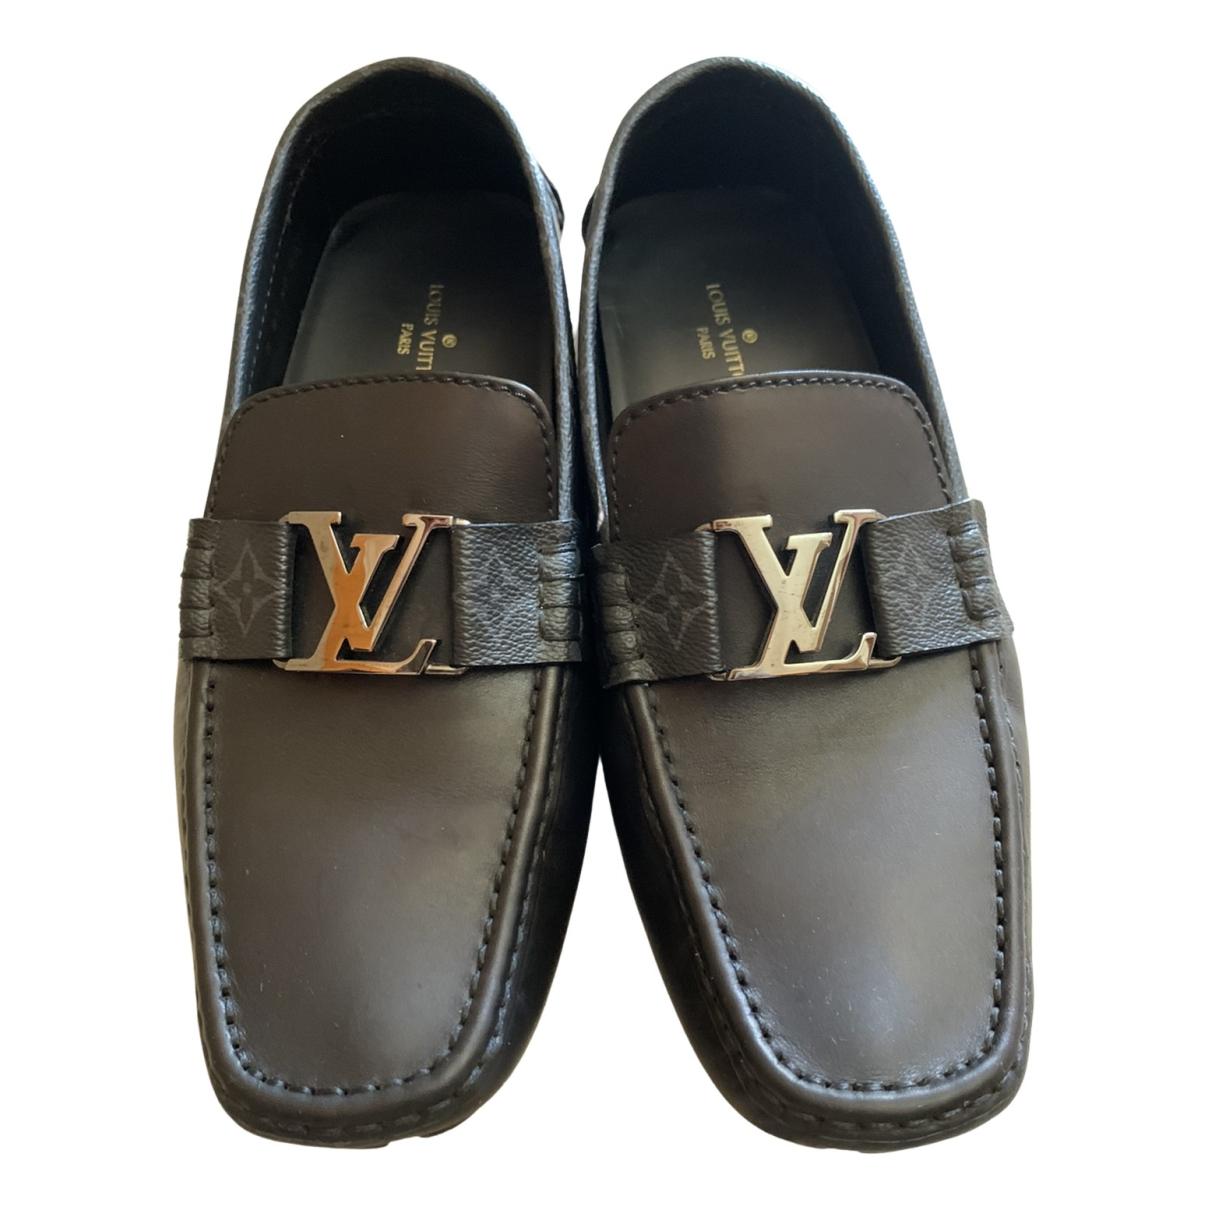 Louis Vuitton Monte Carlo loafers